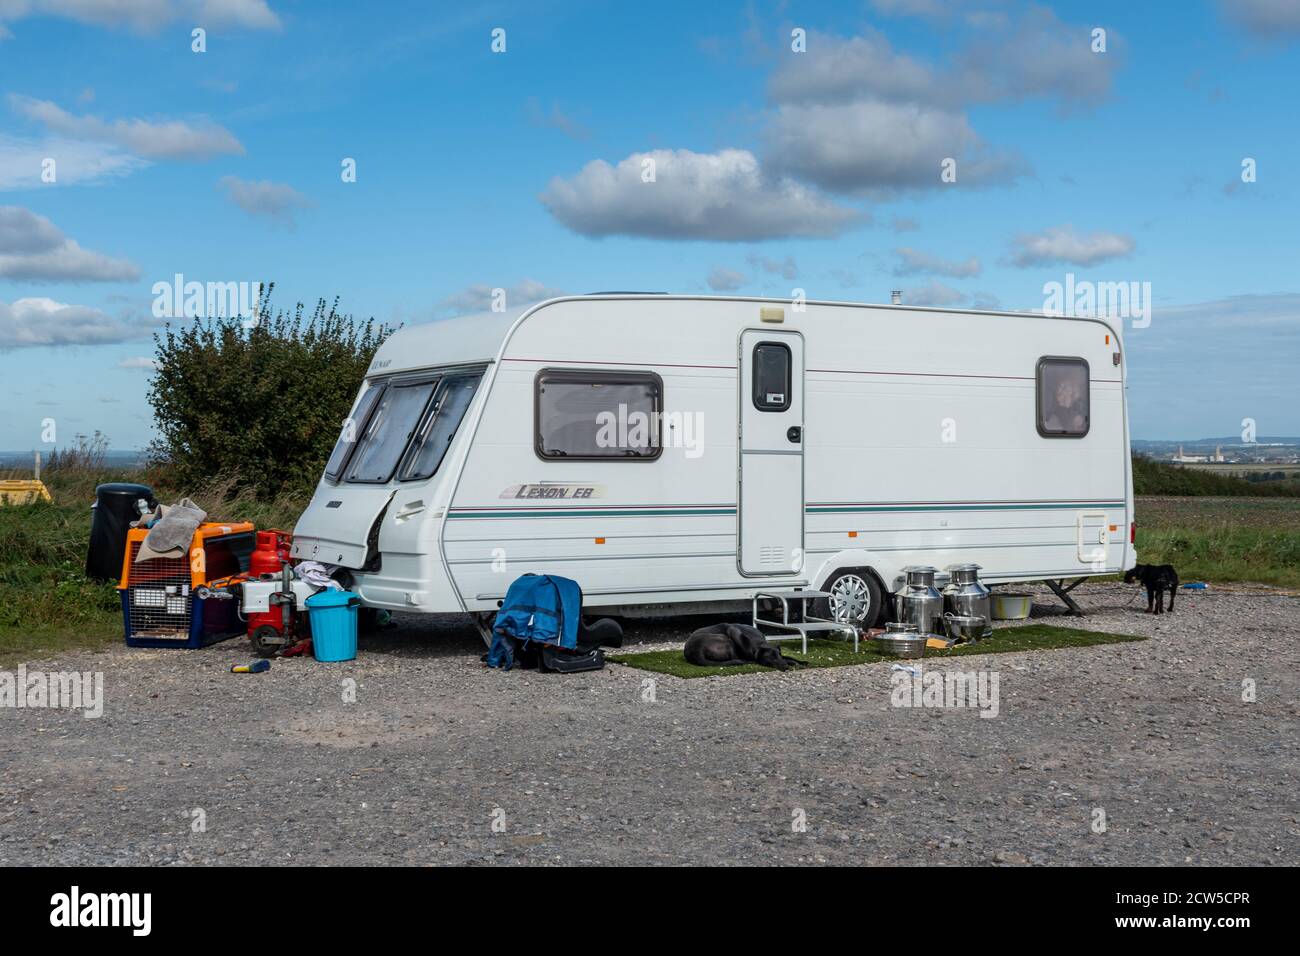 Caravan belonging to travellers parked illegally in a countryside car park with dogs and belongings outside, UK Stock Photo